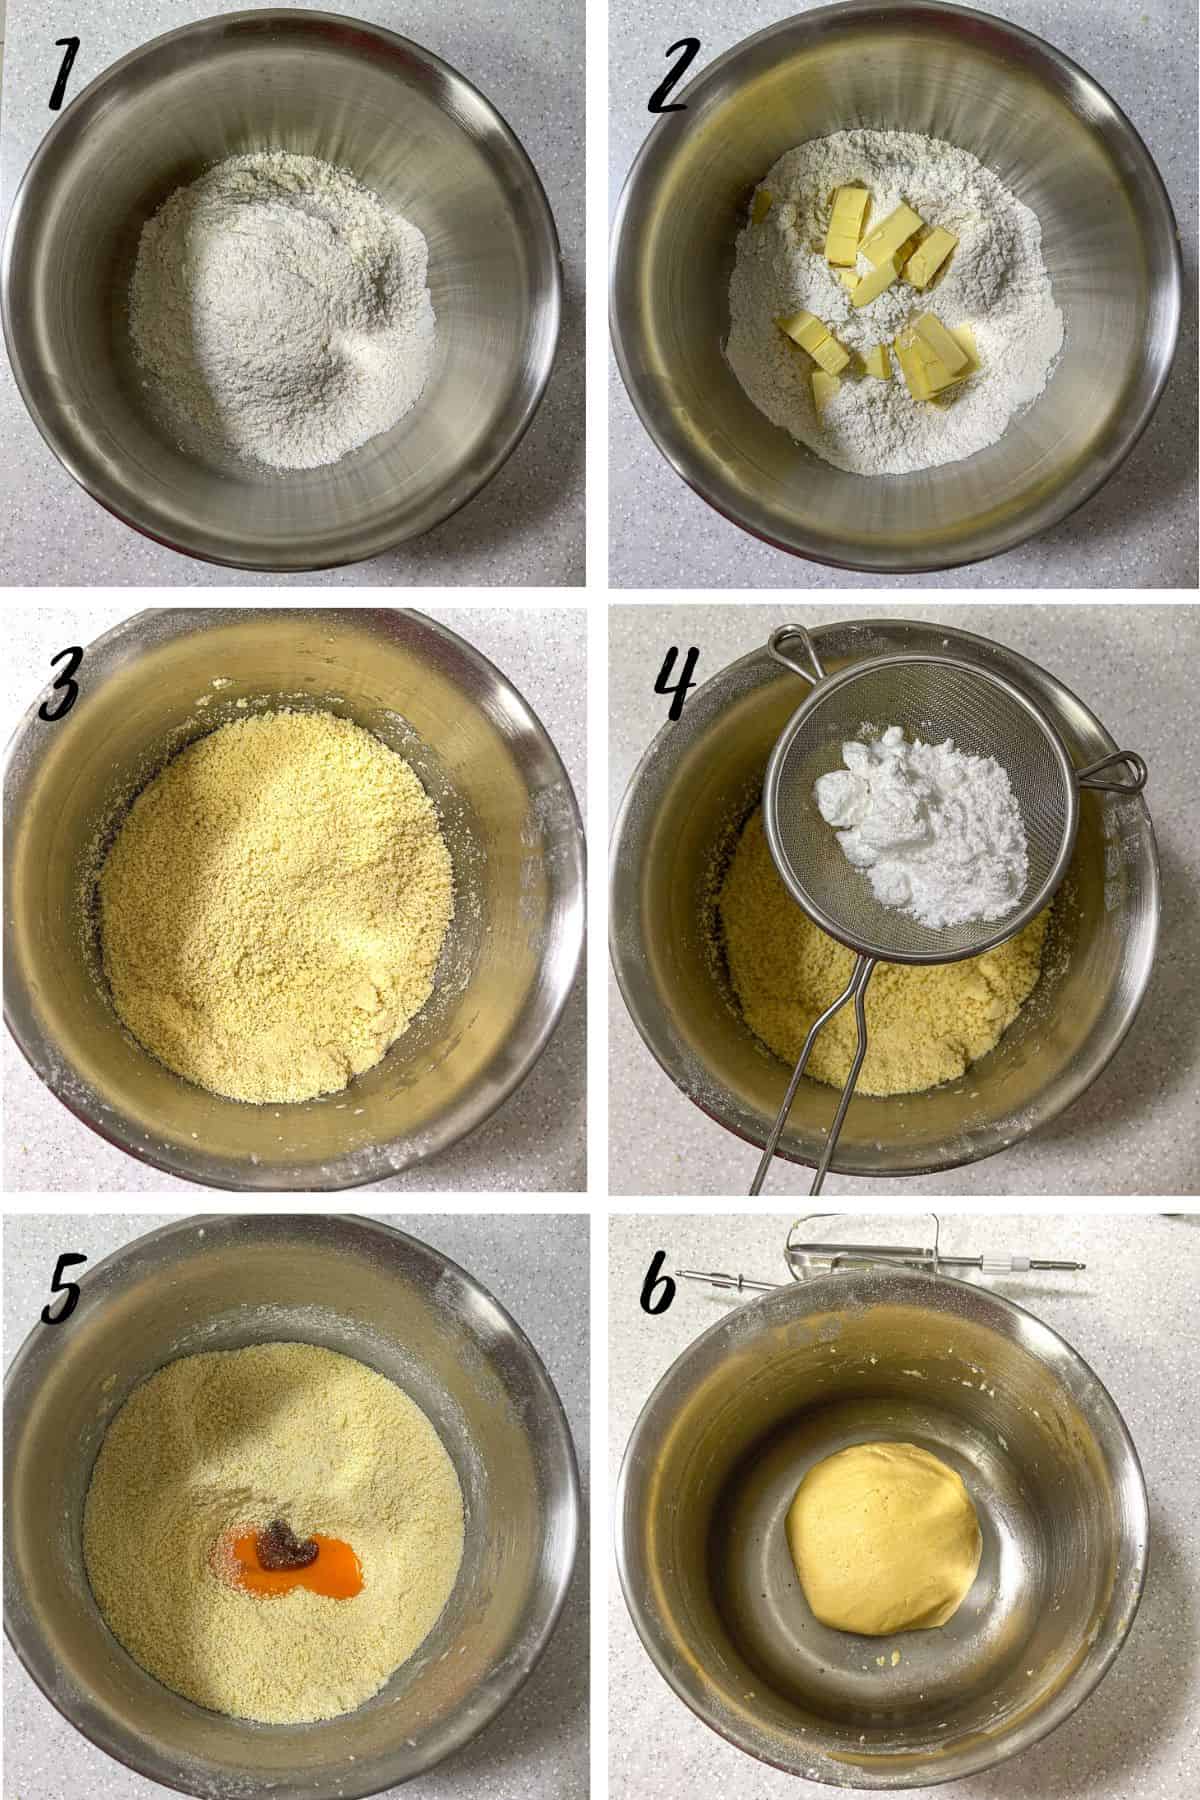 A poster of 6 images showing how to make sweet pie pastry.